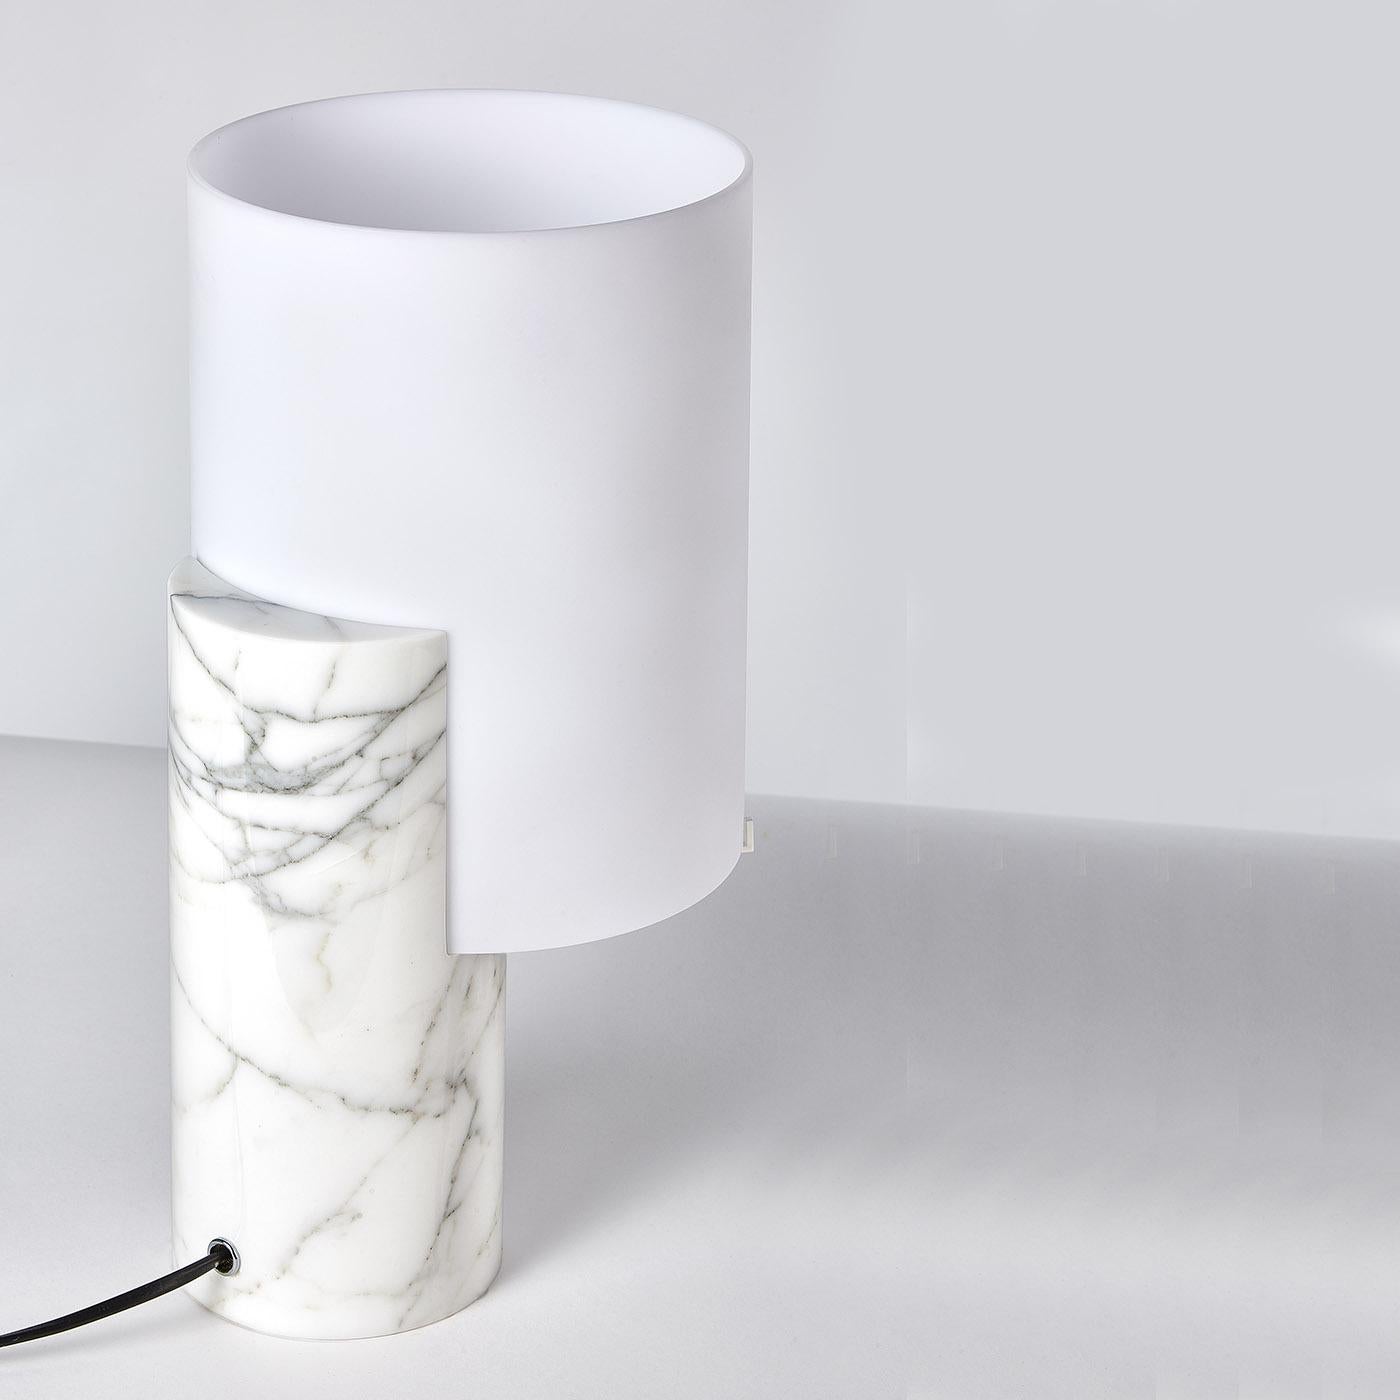 A testament to elegance and simplicity, this stupendous table lamp is minutely handcrafted of first-rate materials and rendered in clean and pure forms. Mounted on a white Carrara marble body, the satin white shade is made of polycarbonate. Designed